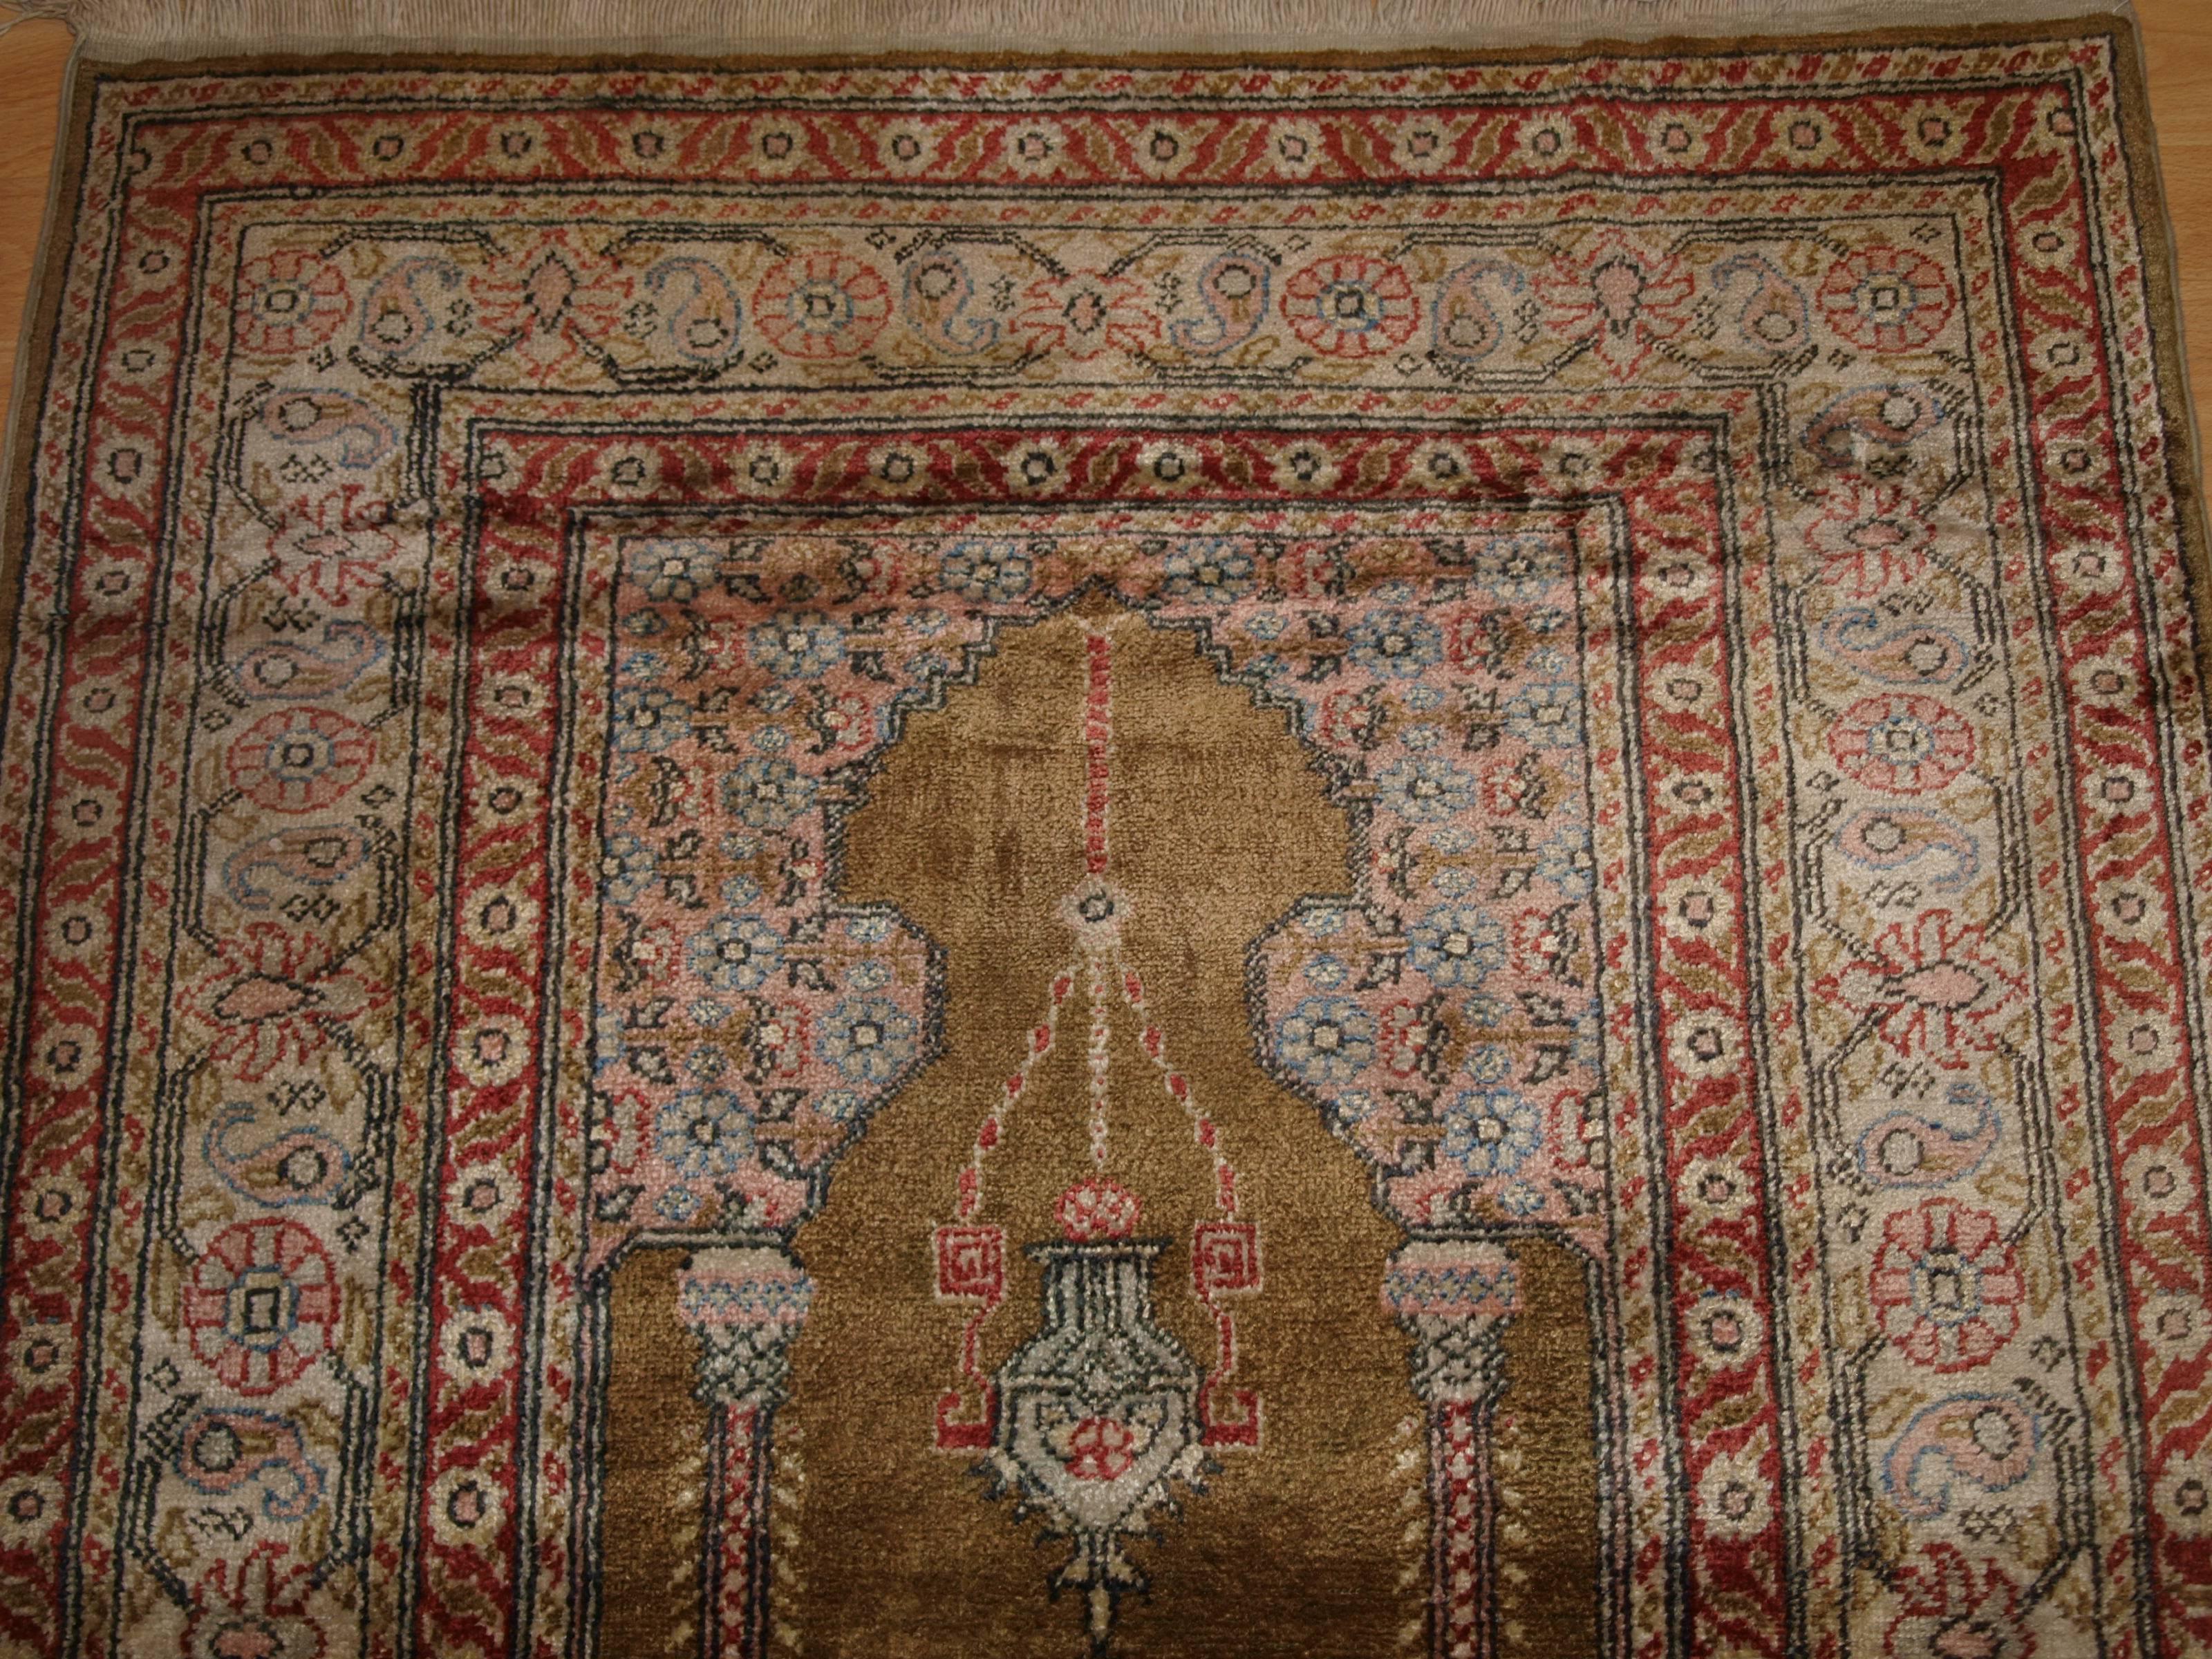 Antique Anatolian Kayseri 'Art Silk' Prayer Rug In Excellent Condition For Sale In Moreton-in-Marsh, GB